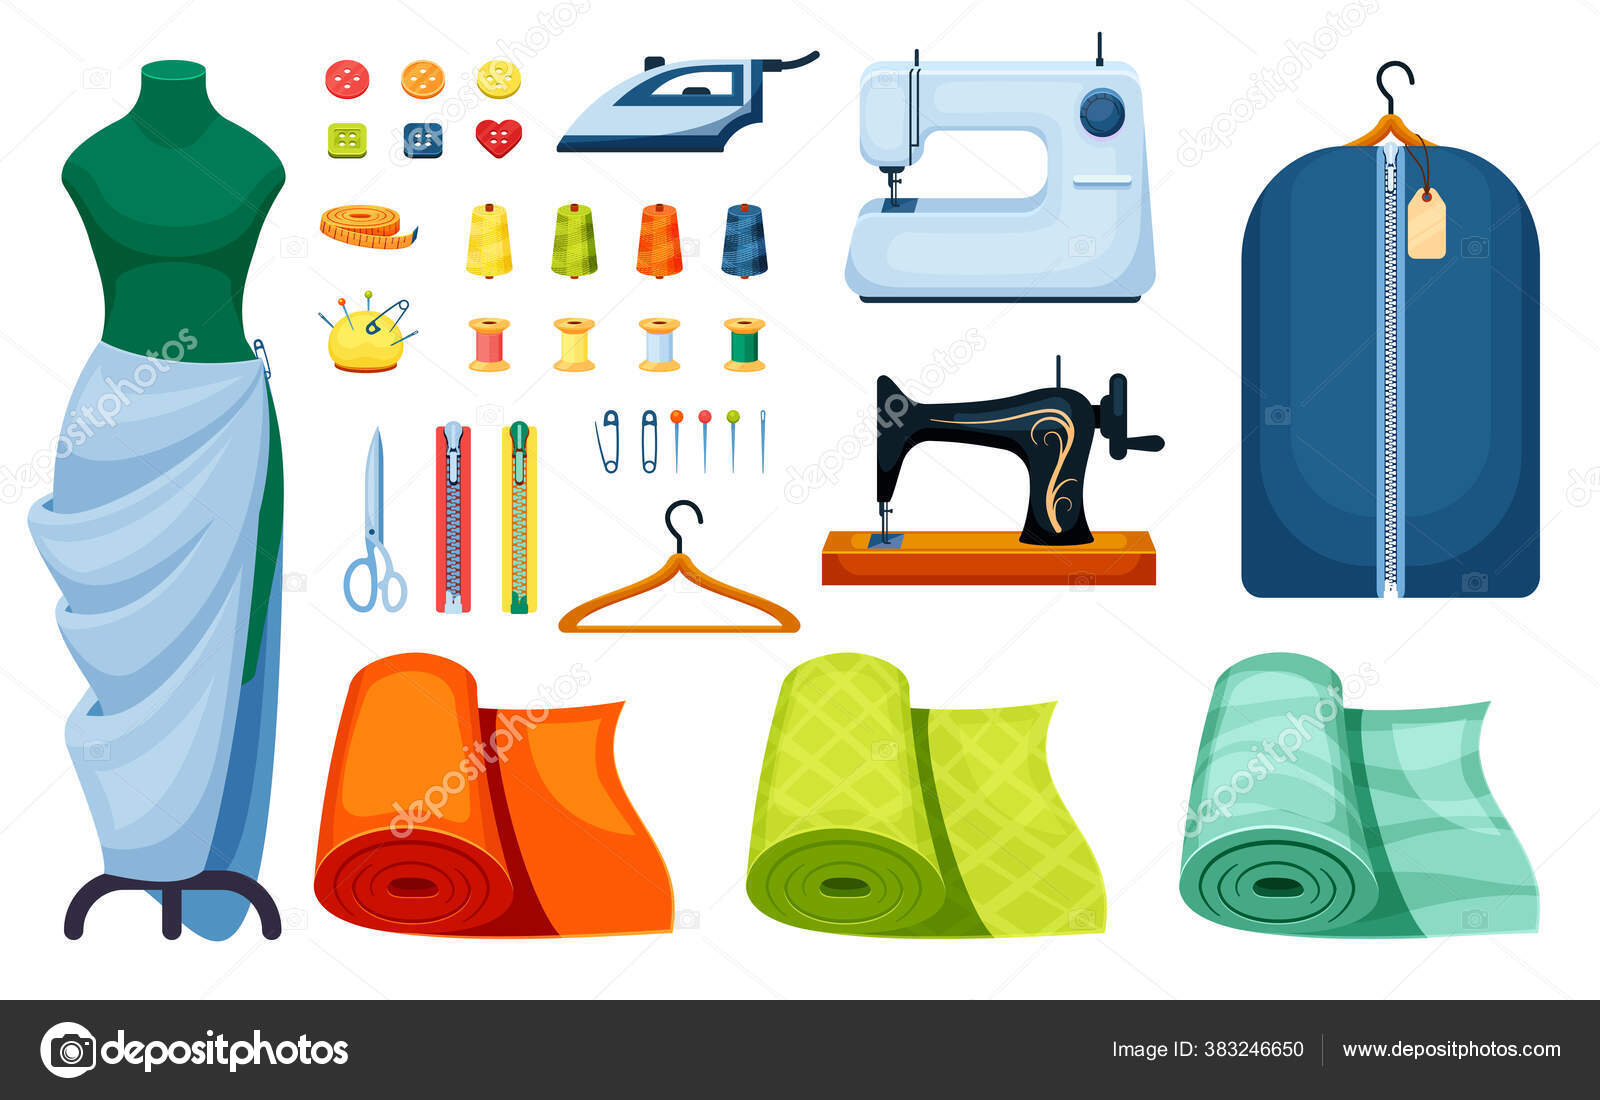 Supplies sewing set. Sewing machine white iron centimeter singer hanger  scissors mannequin roll fitting of fabric orange pin yellow bobbin thread  green spool button needle zipper. Clipart vector. Stock Vector by ©Alexcardo